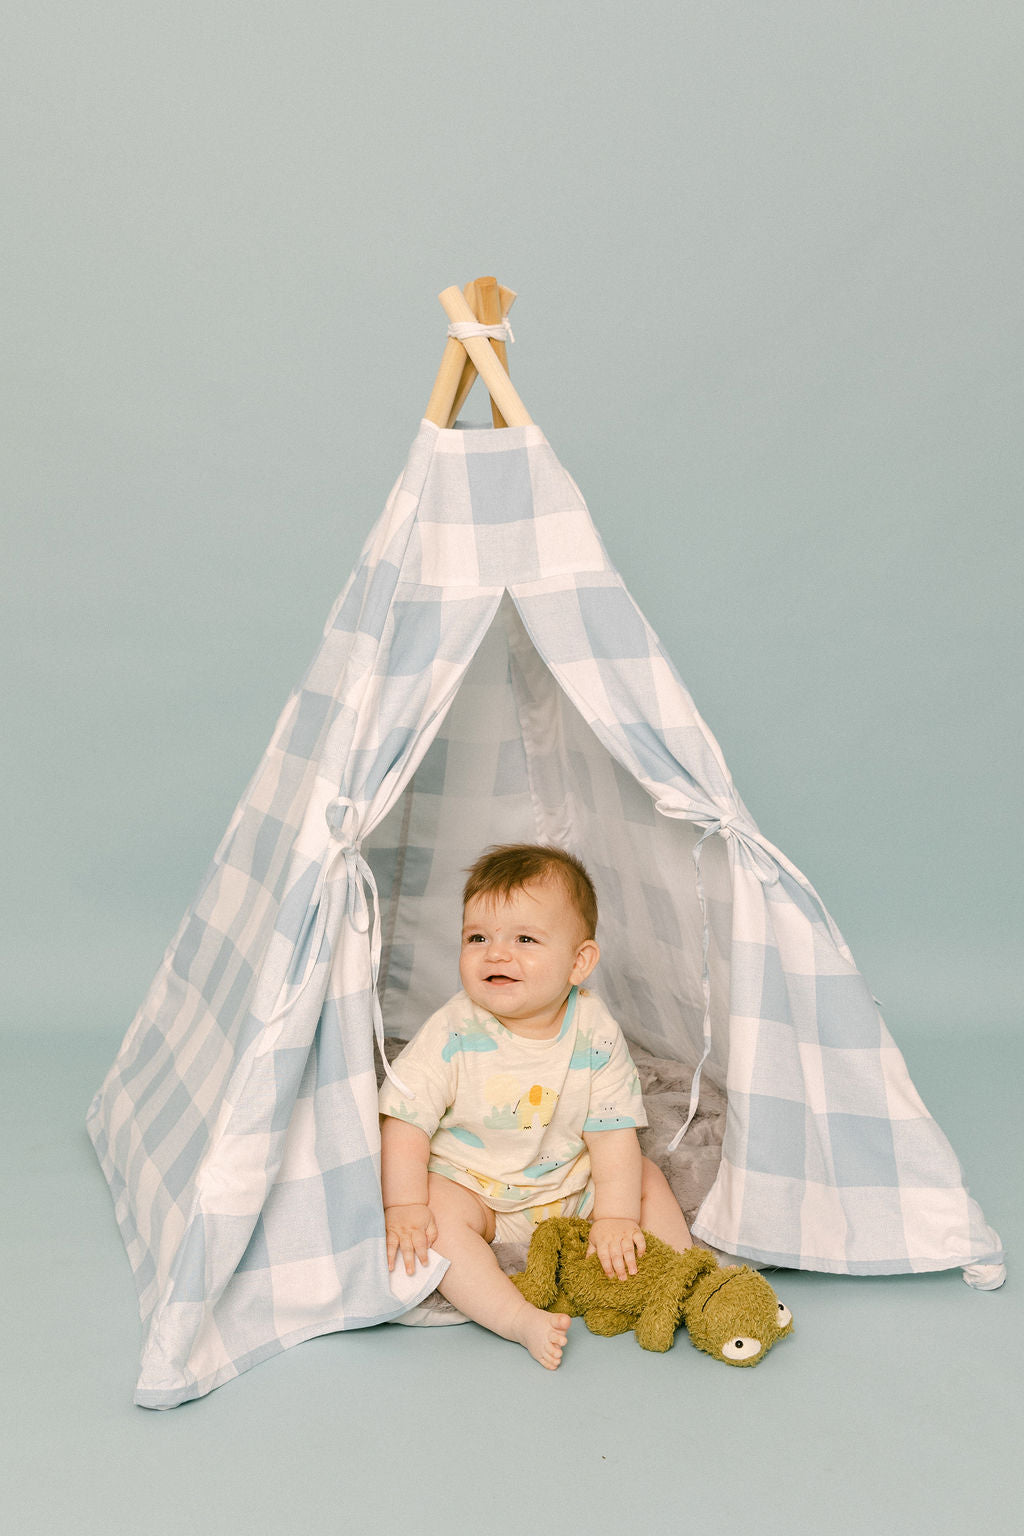 The Charles Itty Bitty Play Tent